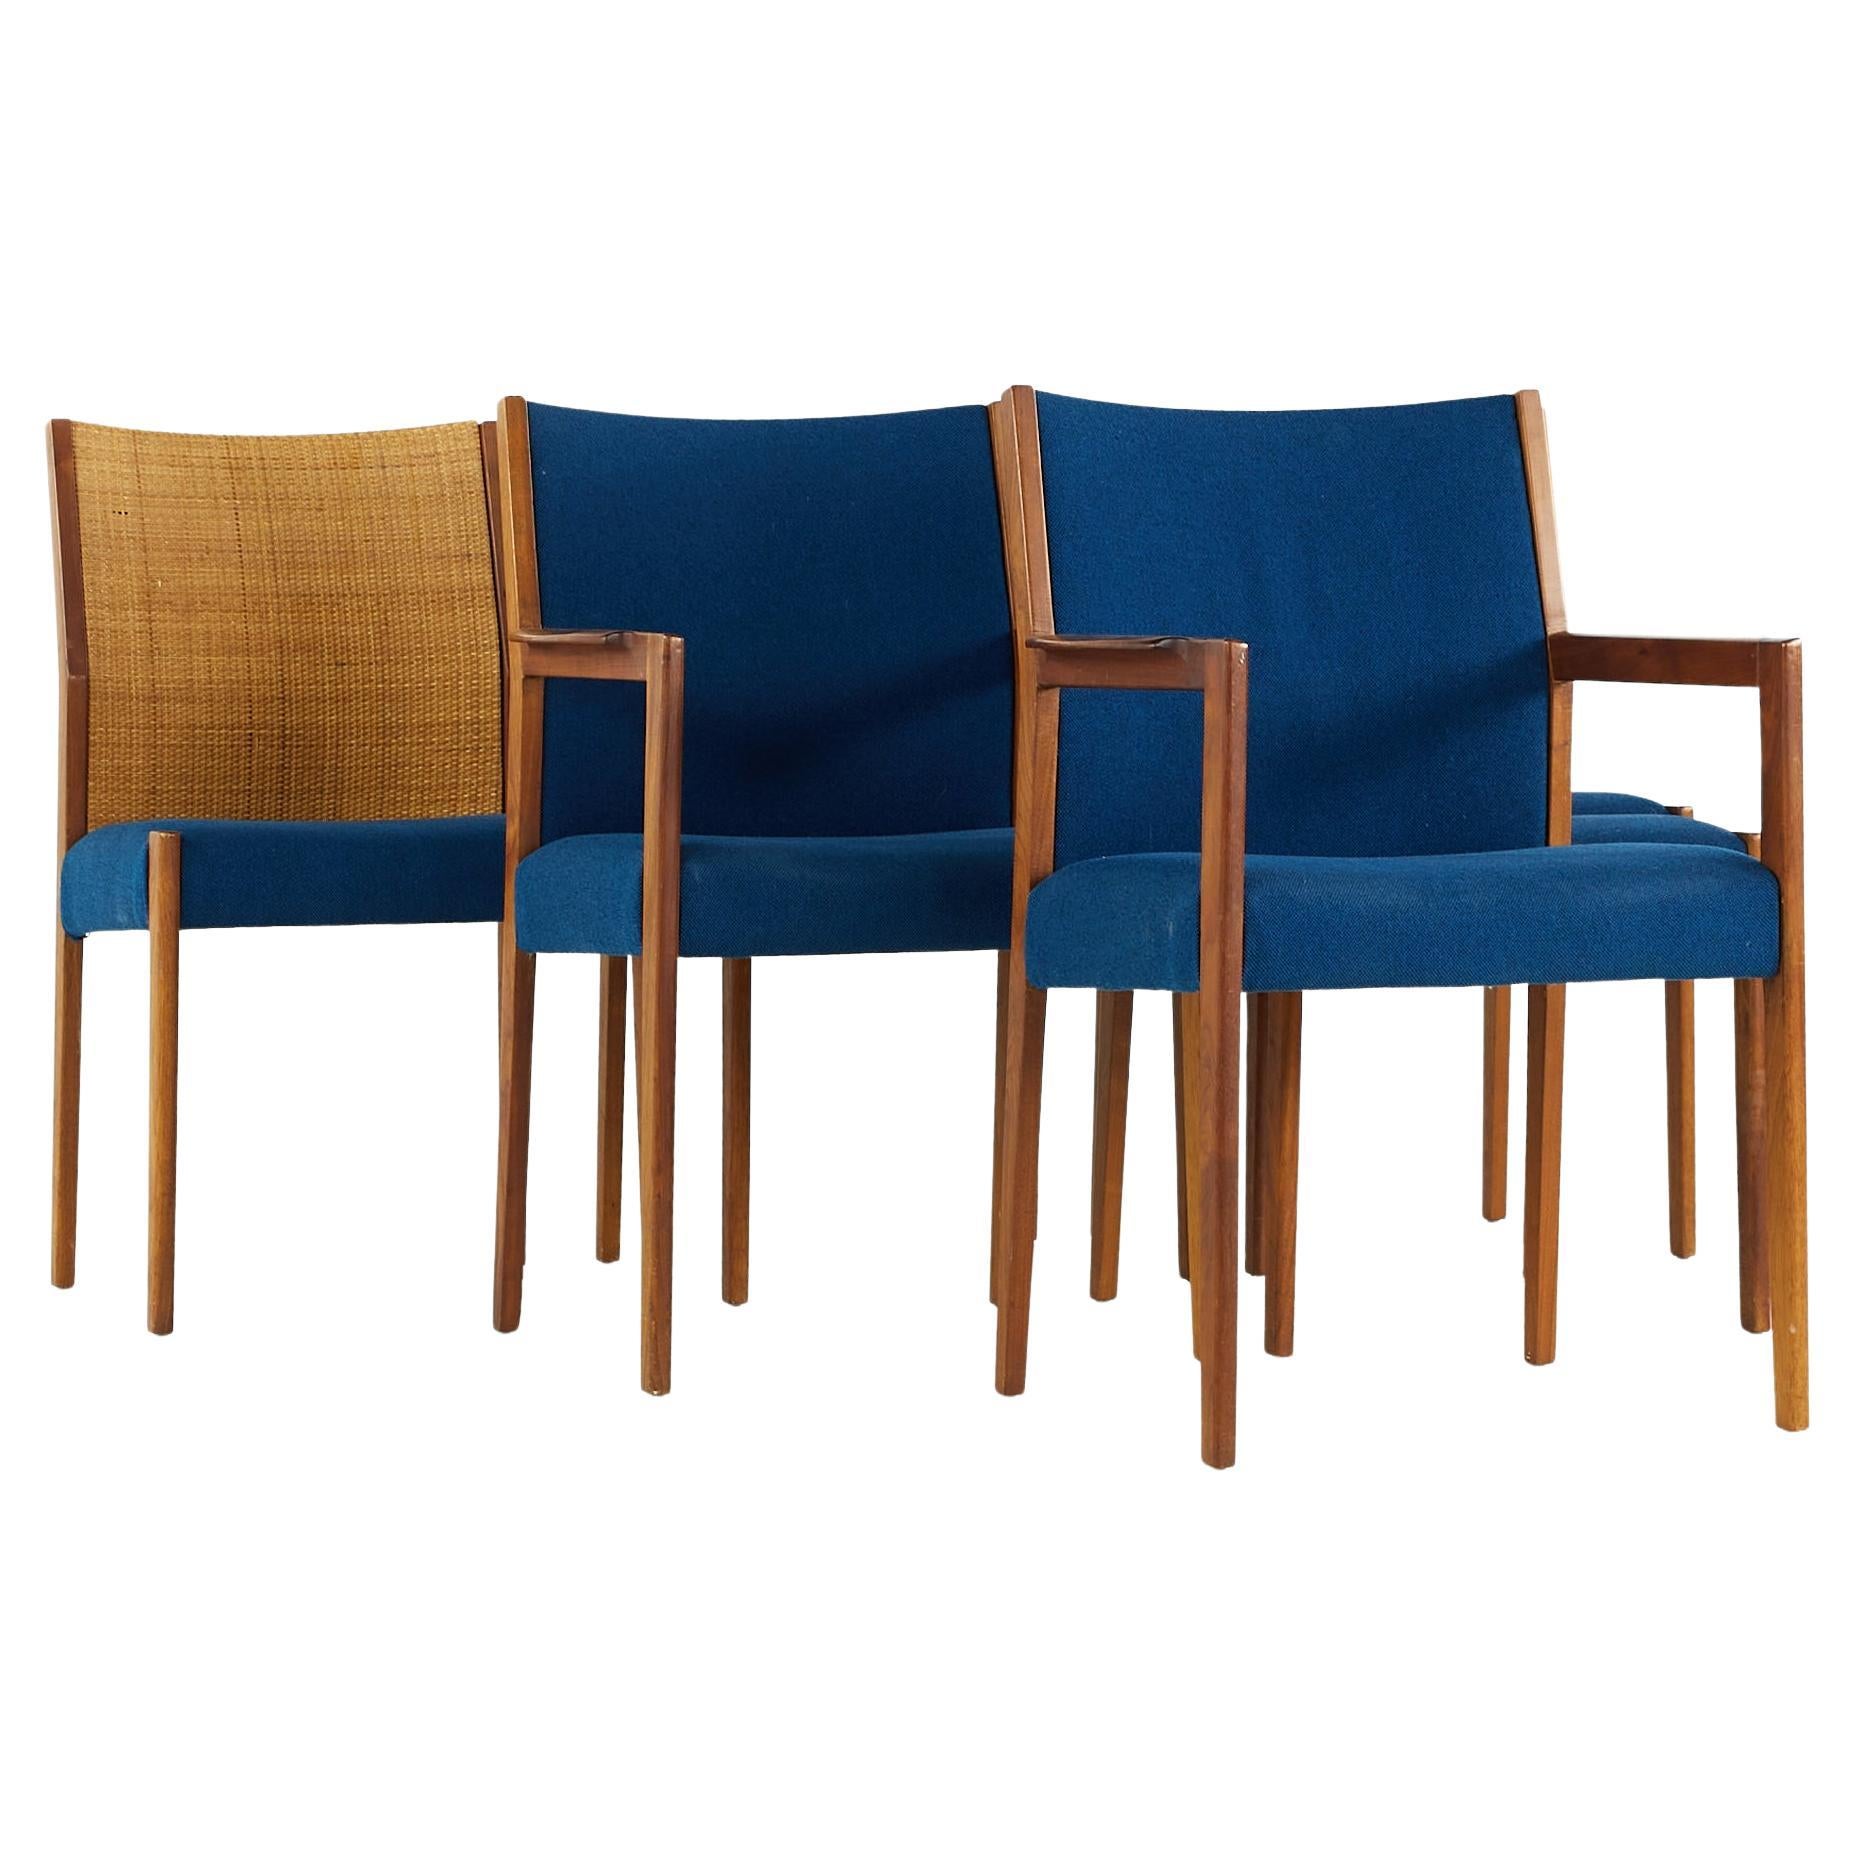 Jens Risom Midcentury Cane and Walnut Dining Chairs, Set of 6 For Sale